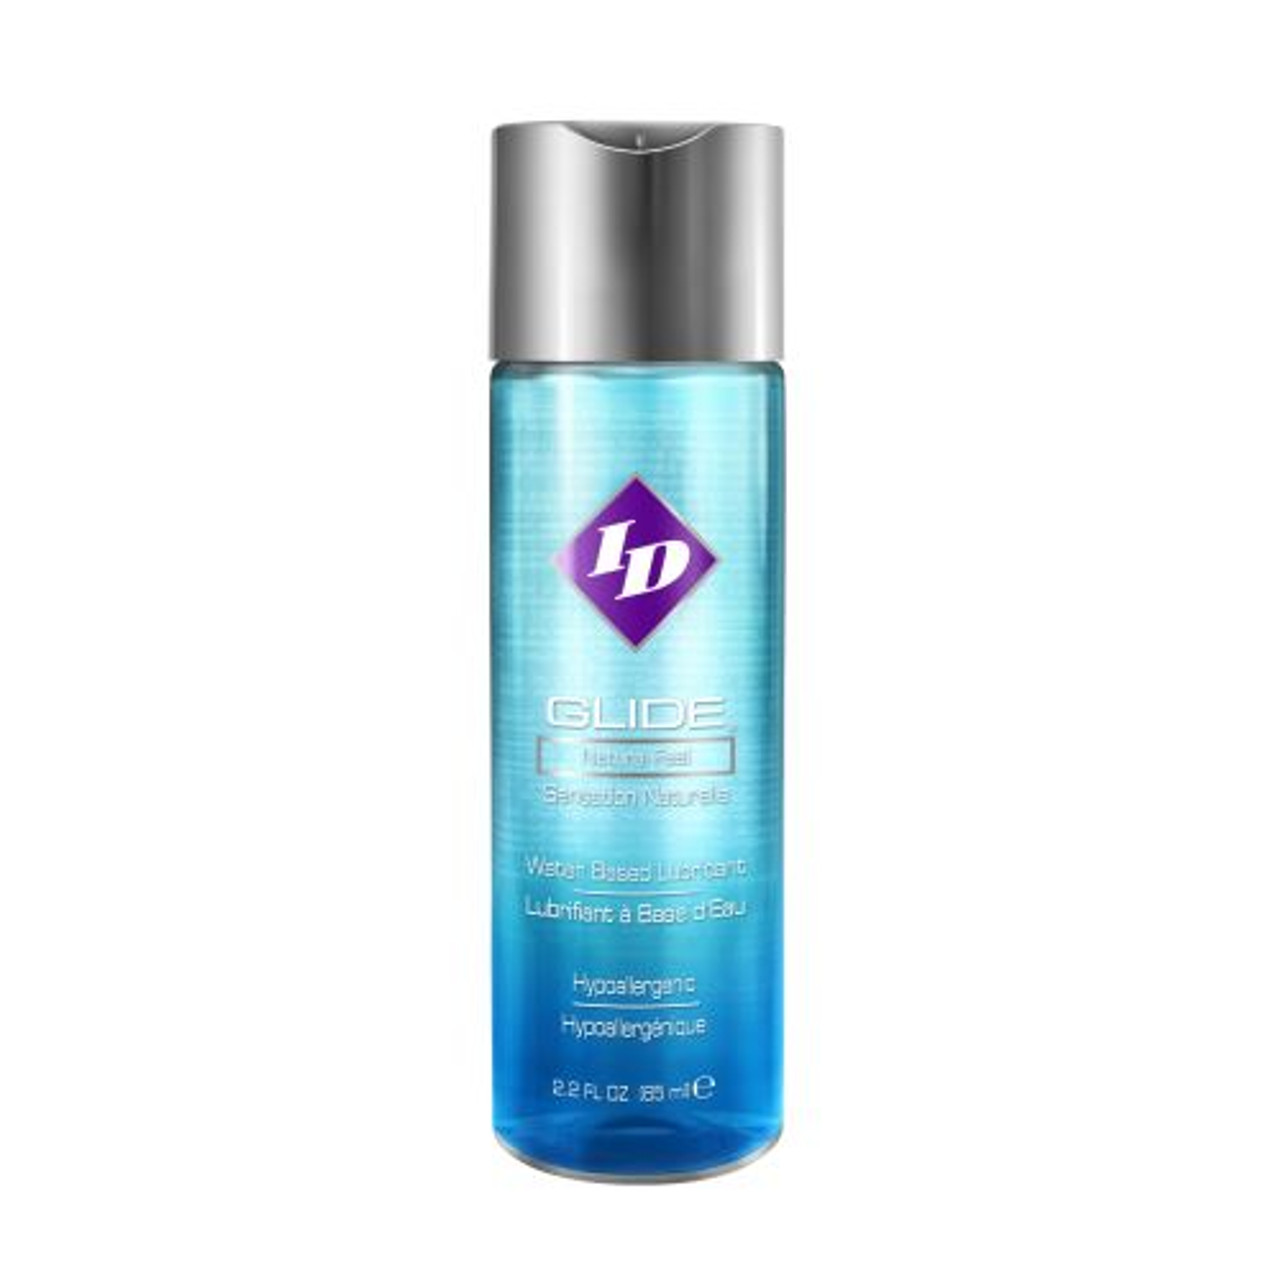 ID Glide Personal Lubricant